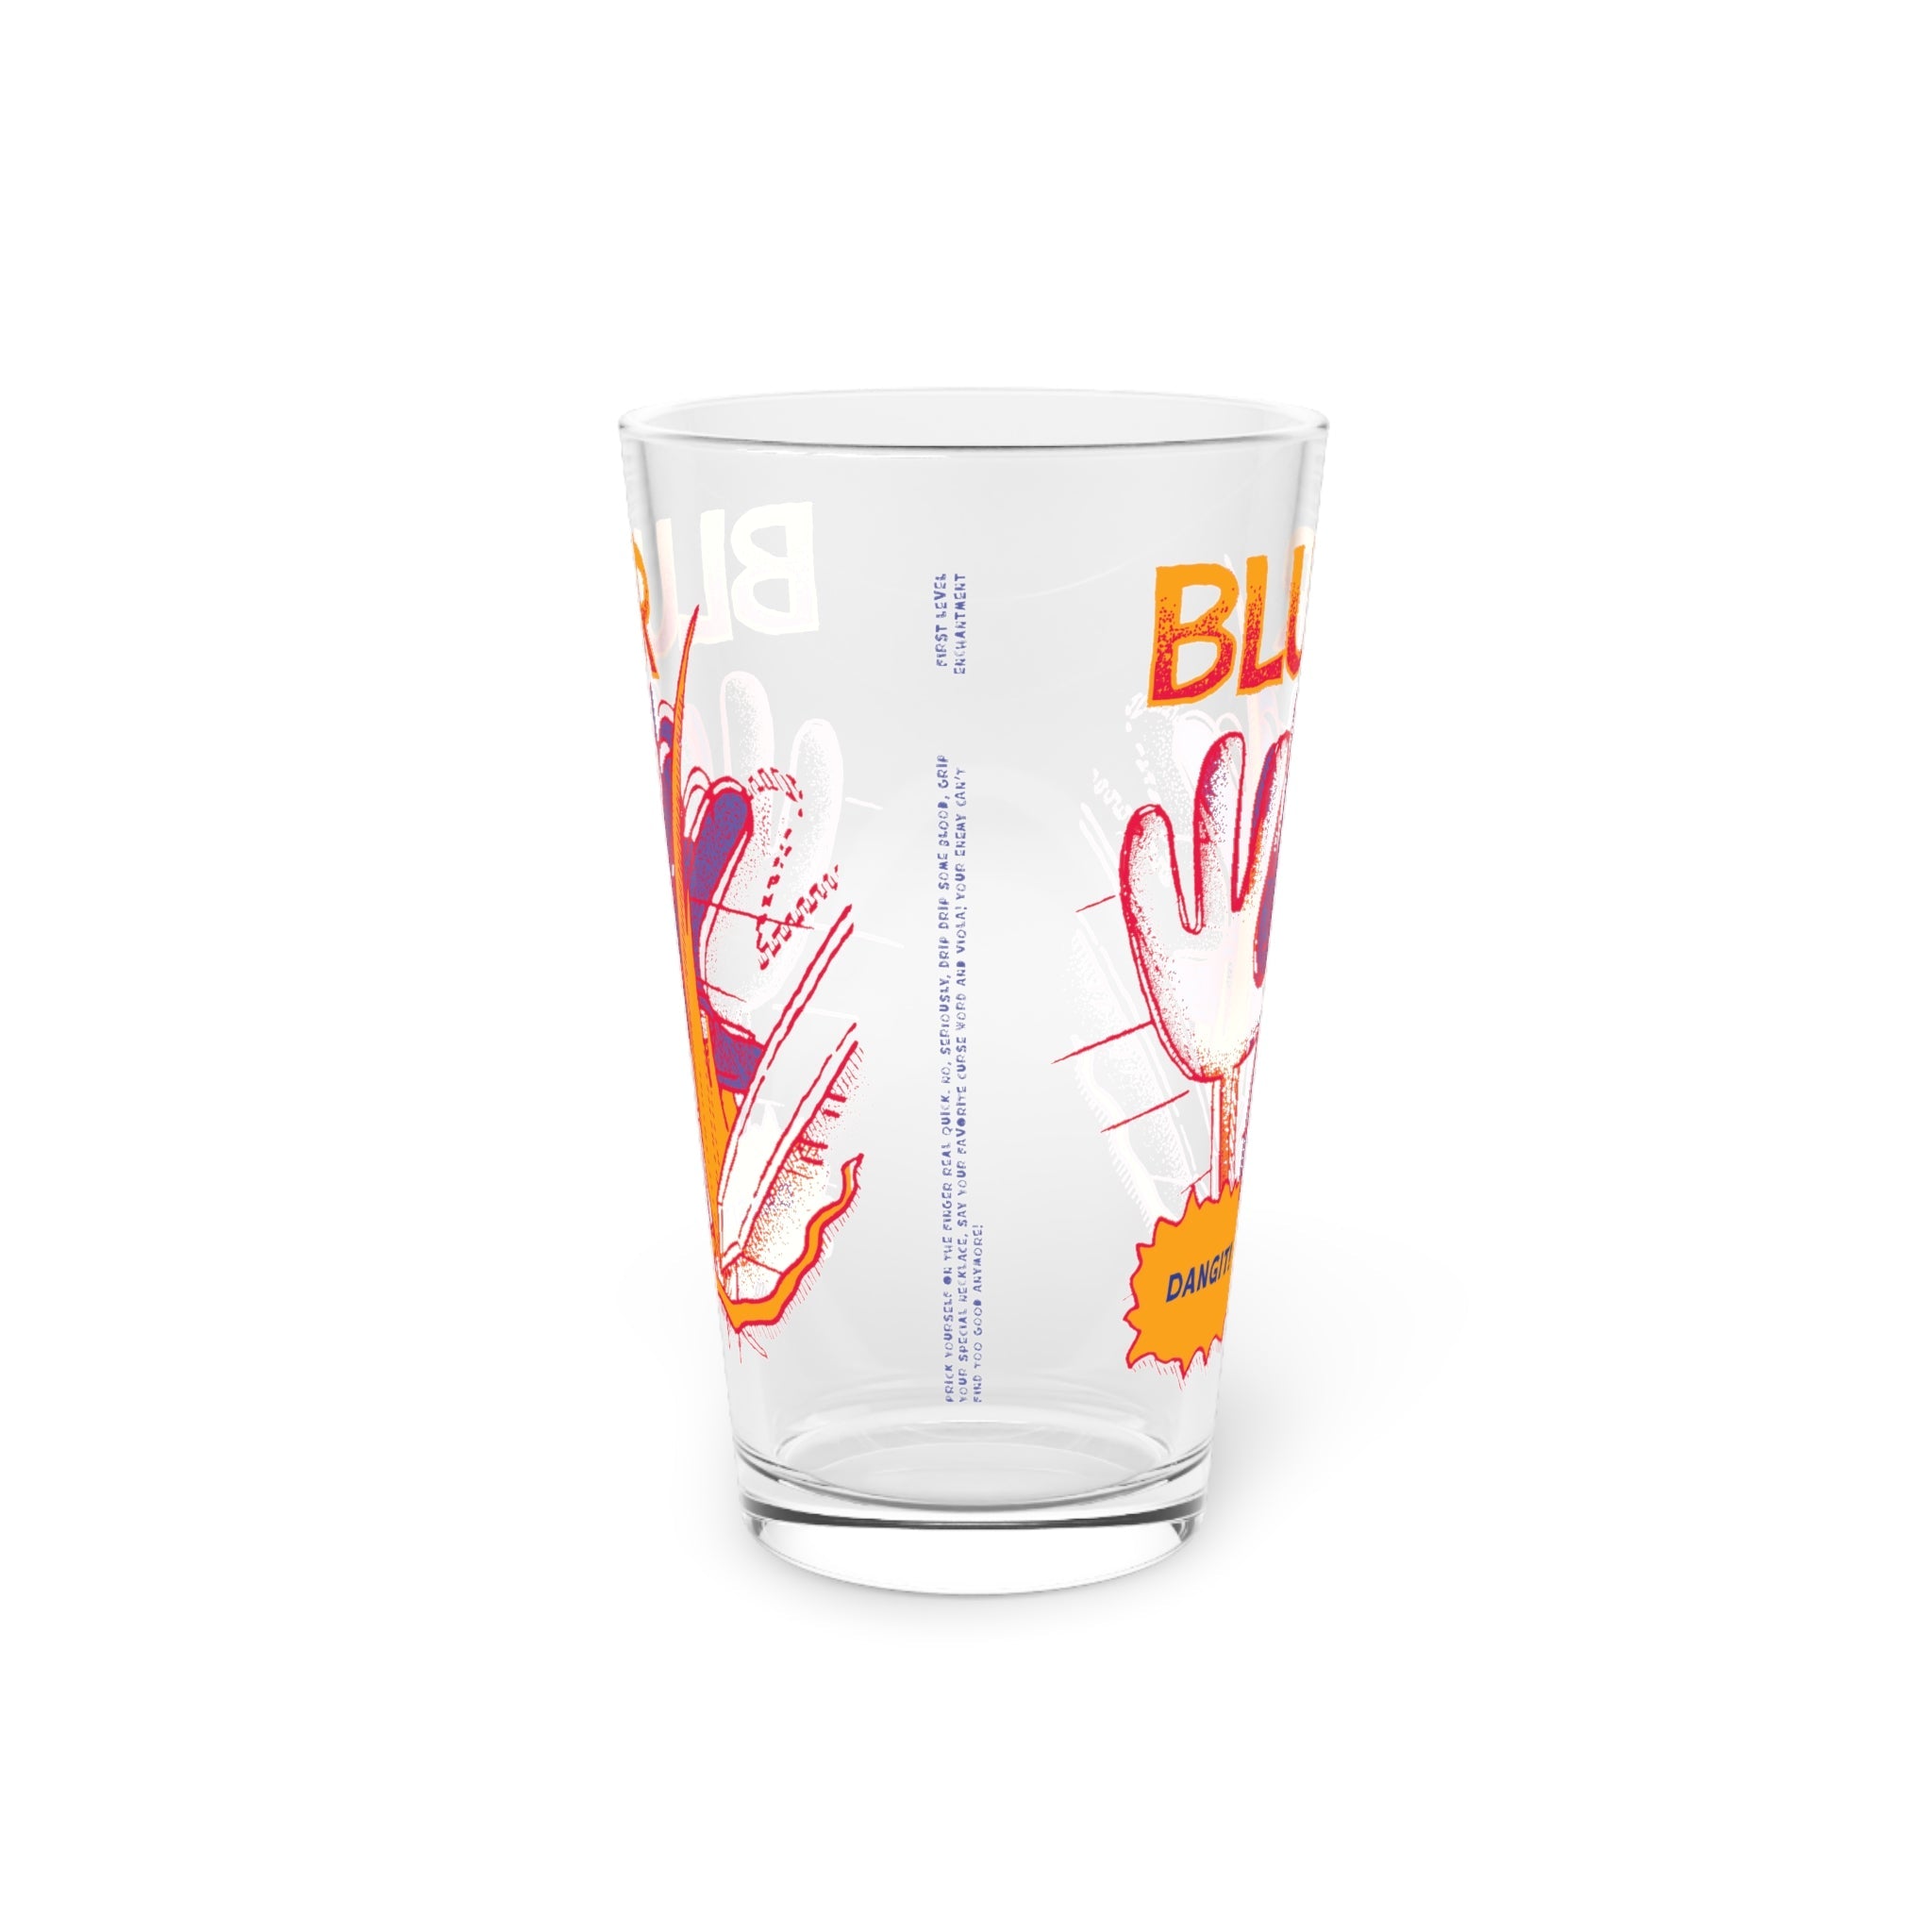 Blur | Pint Glass, 16oz - Drinkware Sets - Ace of Gnomes - 16961182686318479209